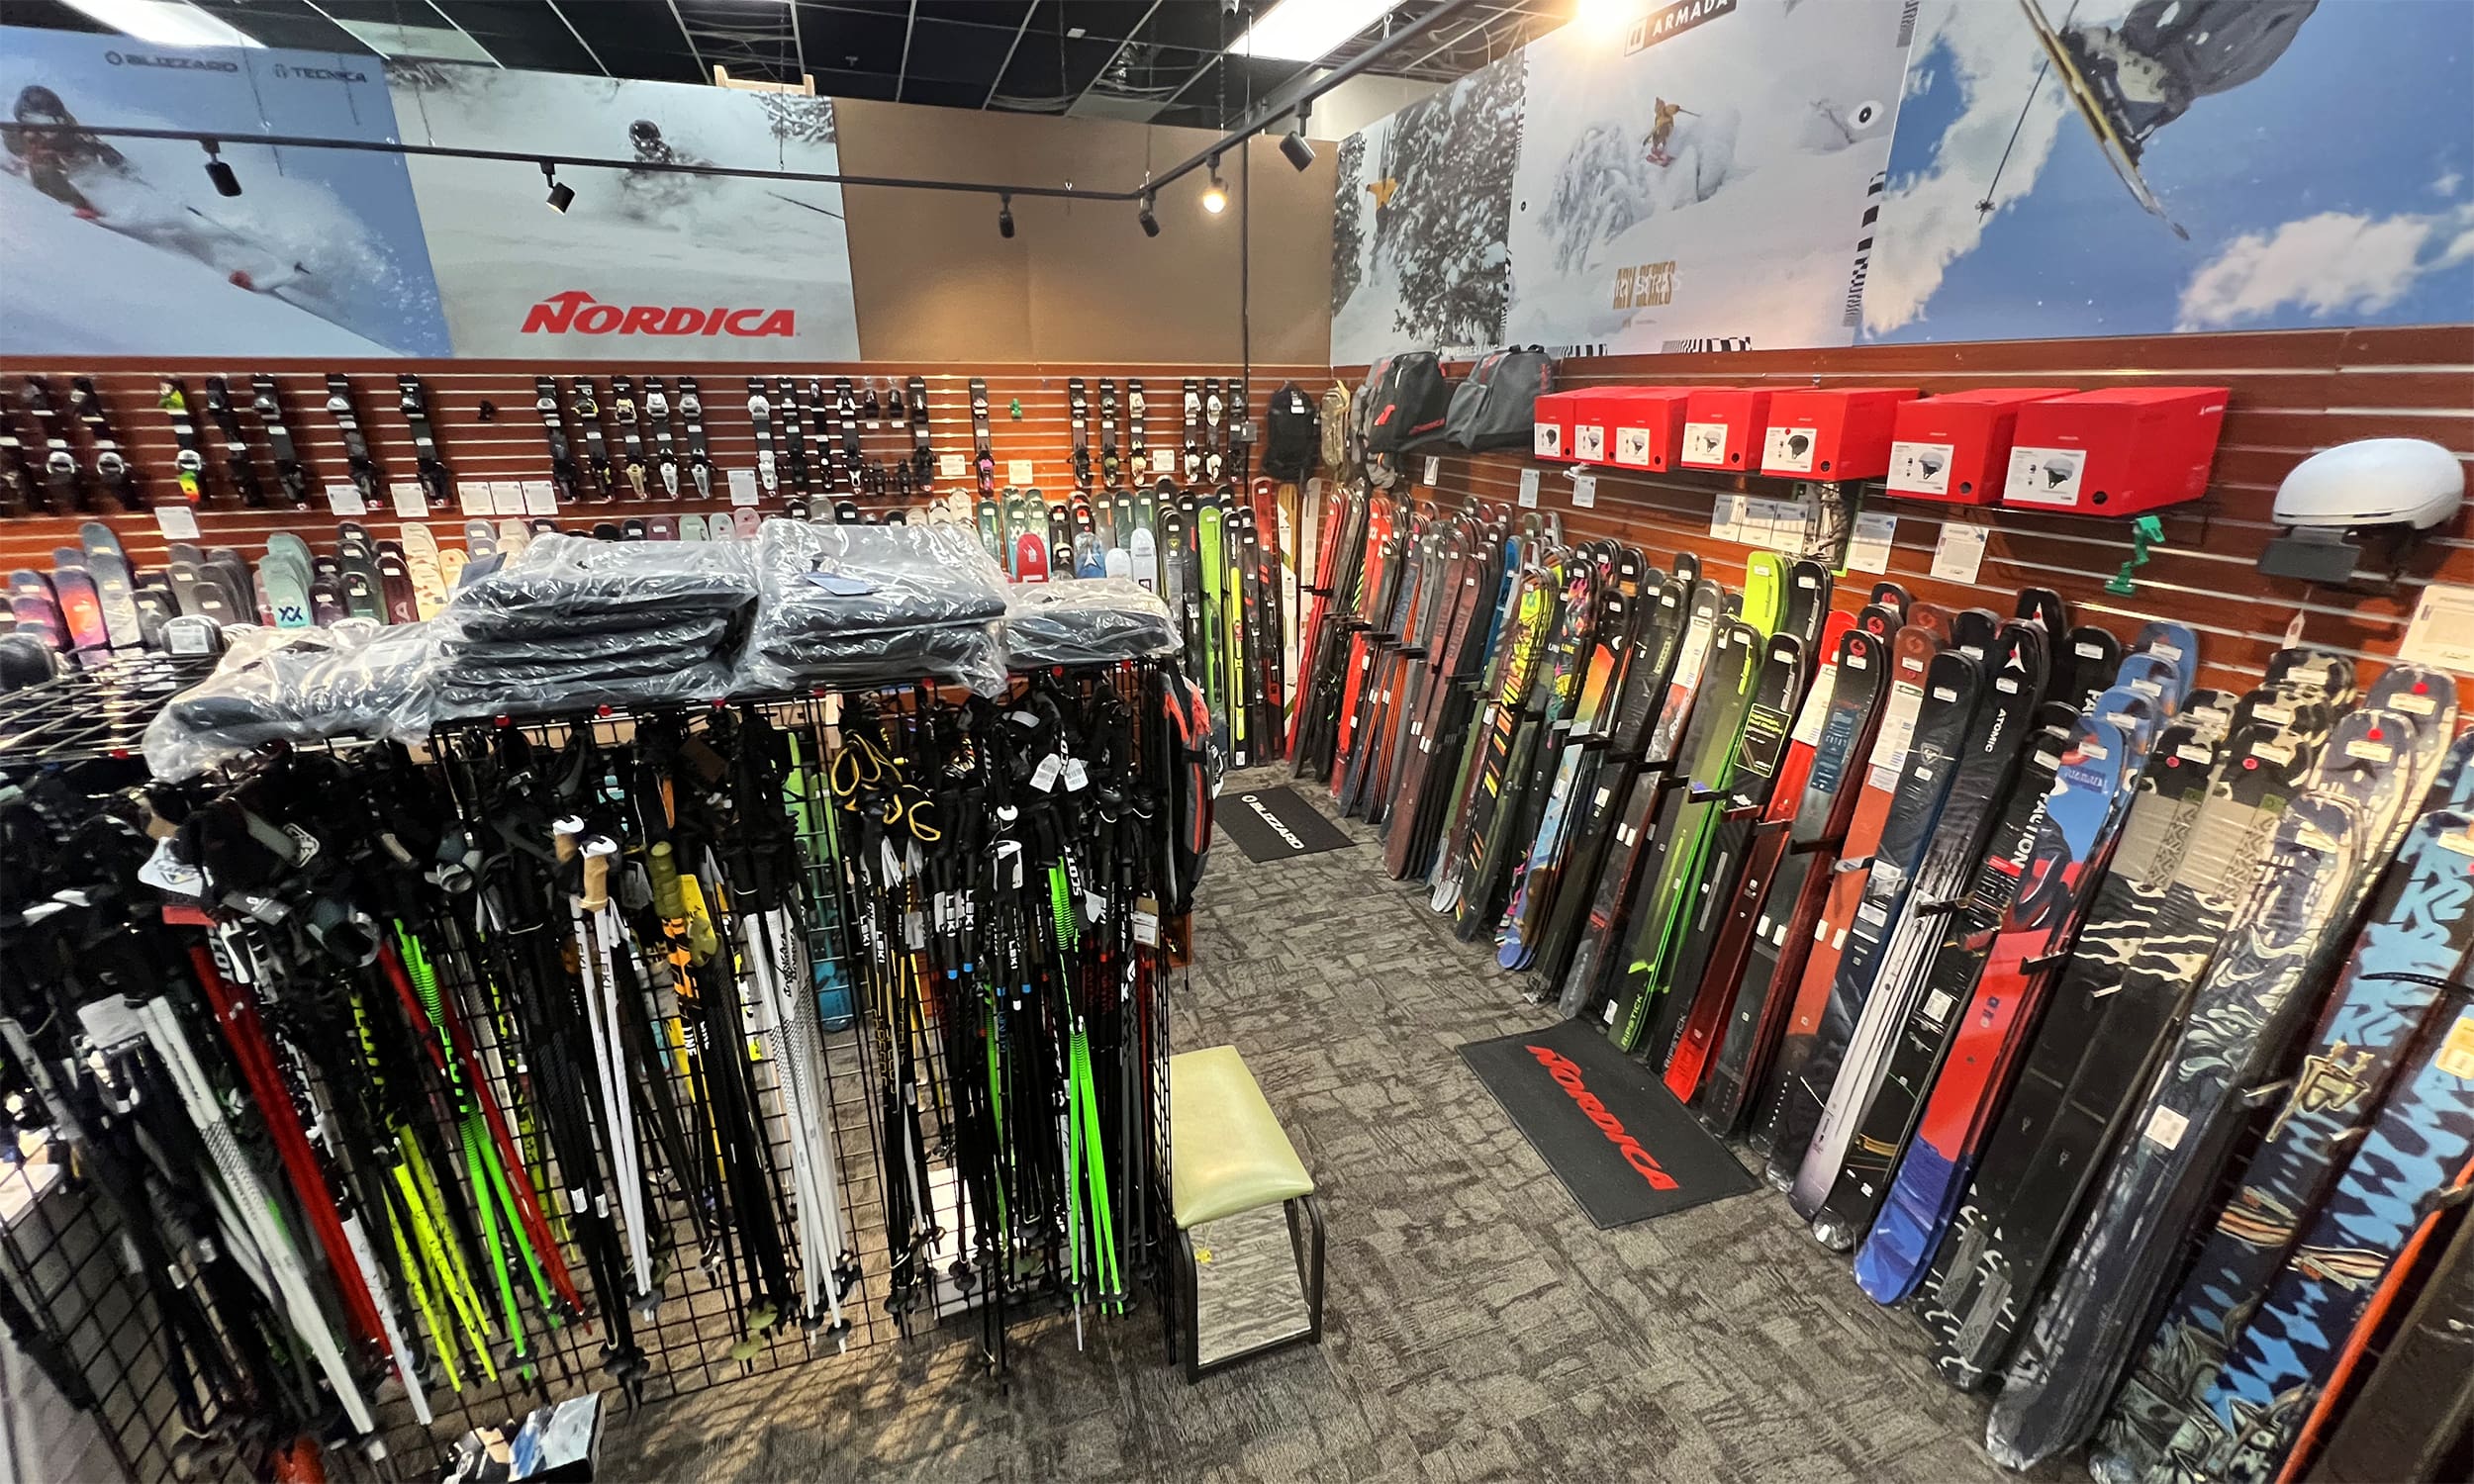 A room filled with lots of skis and poles.